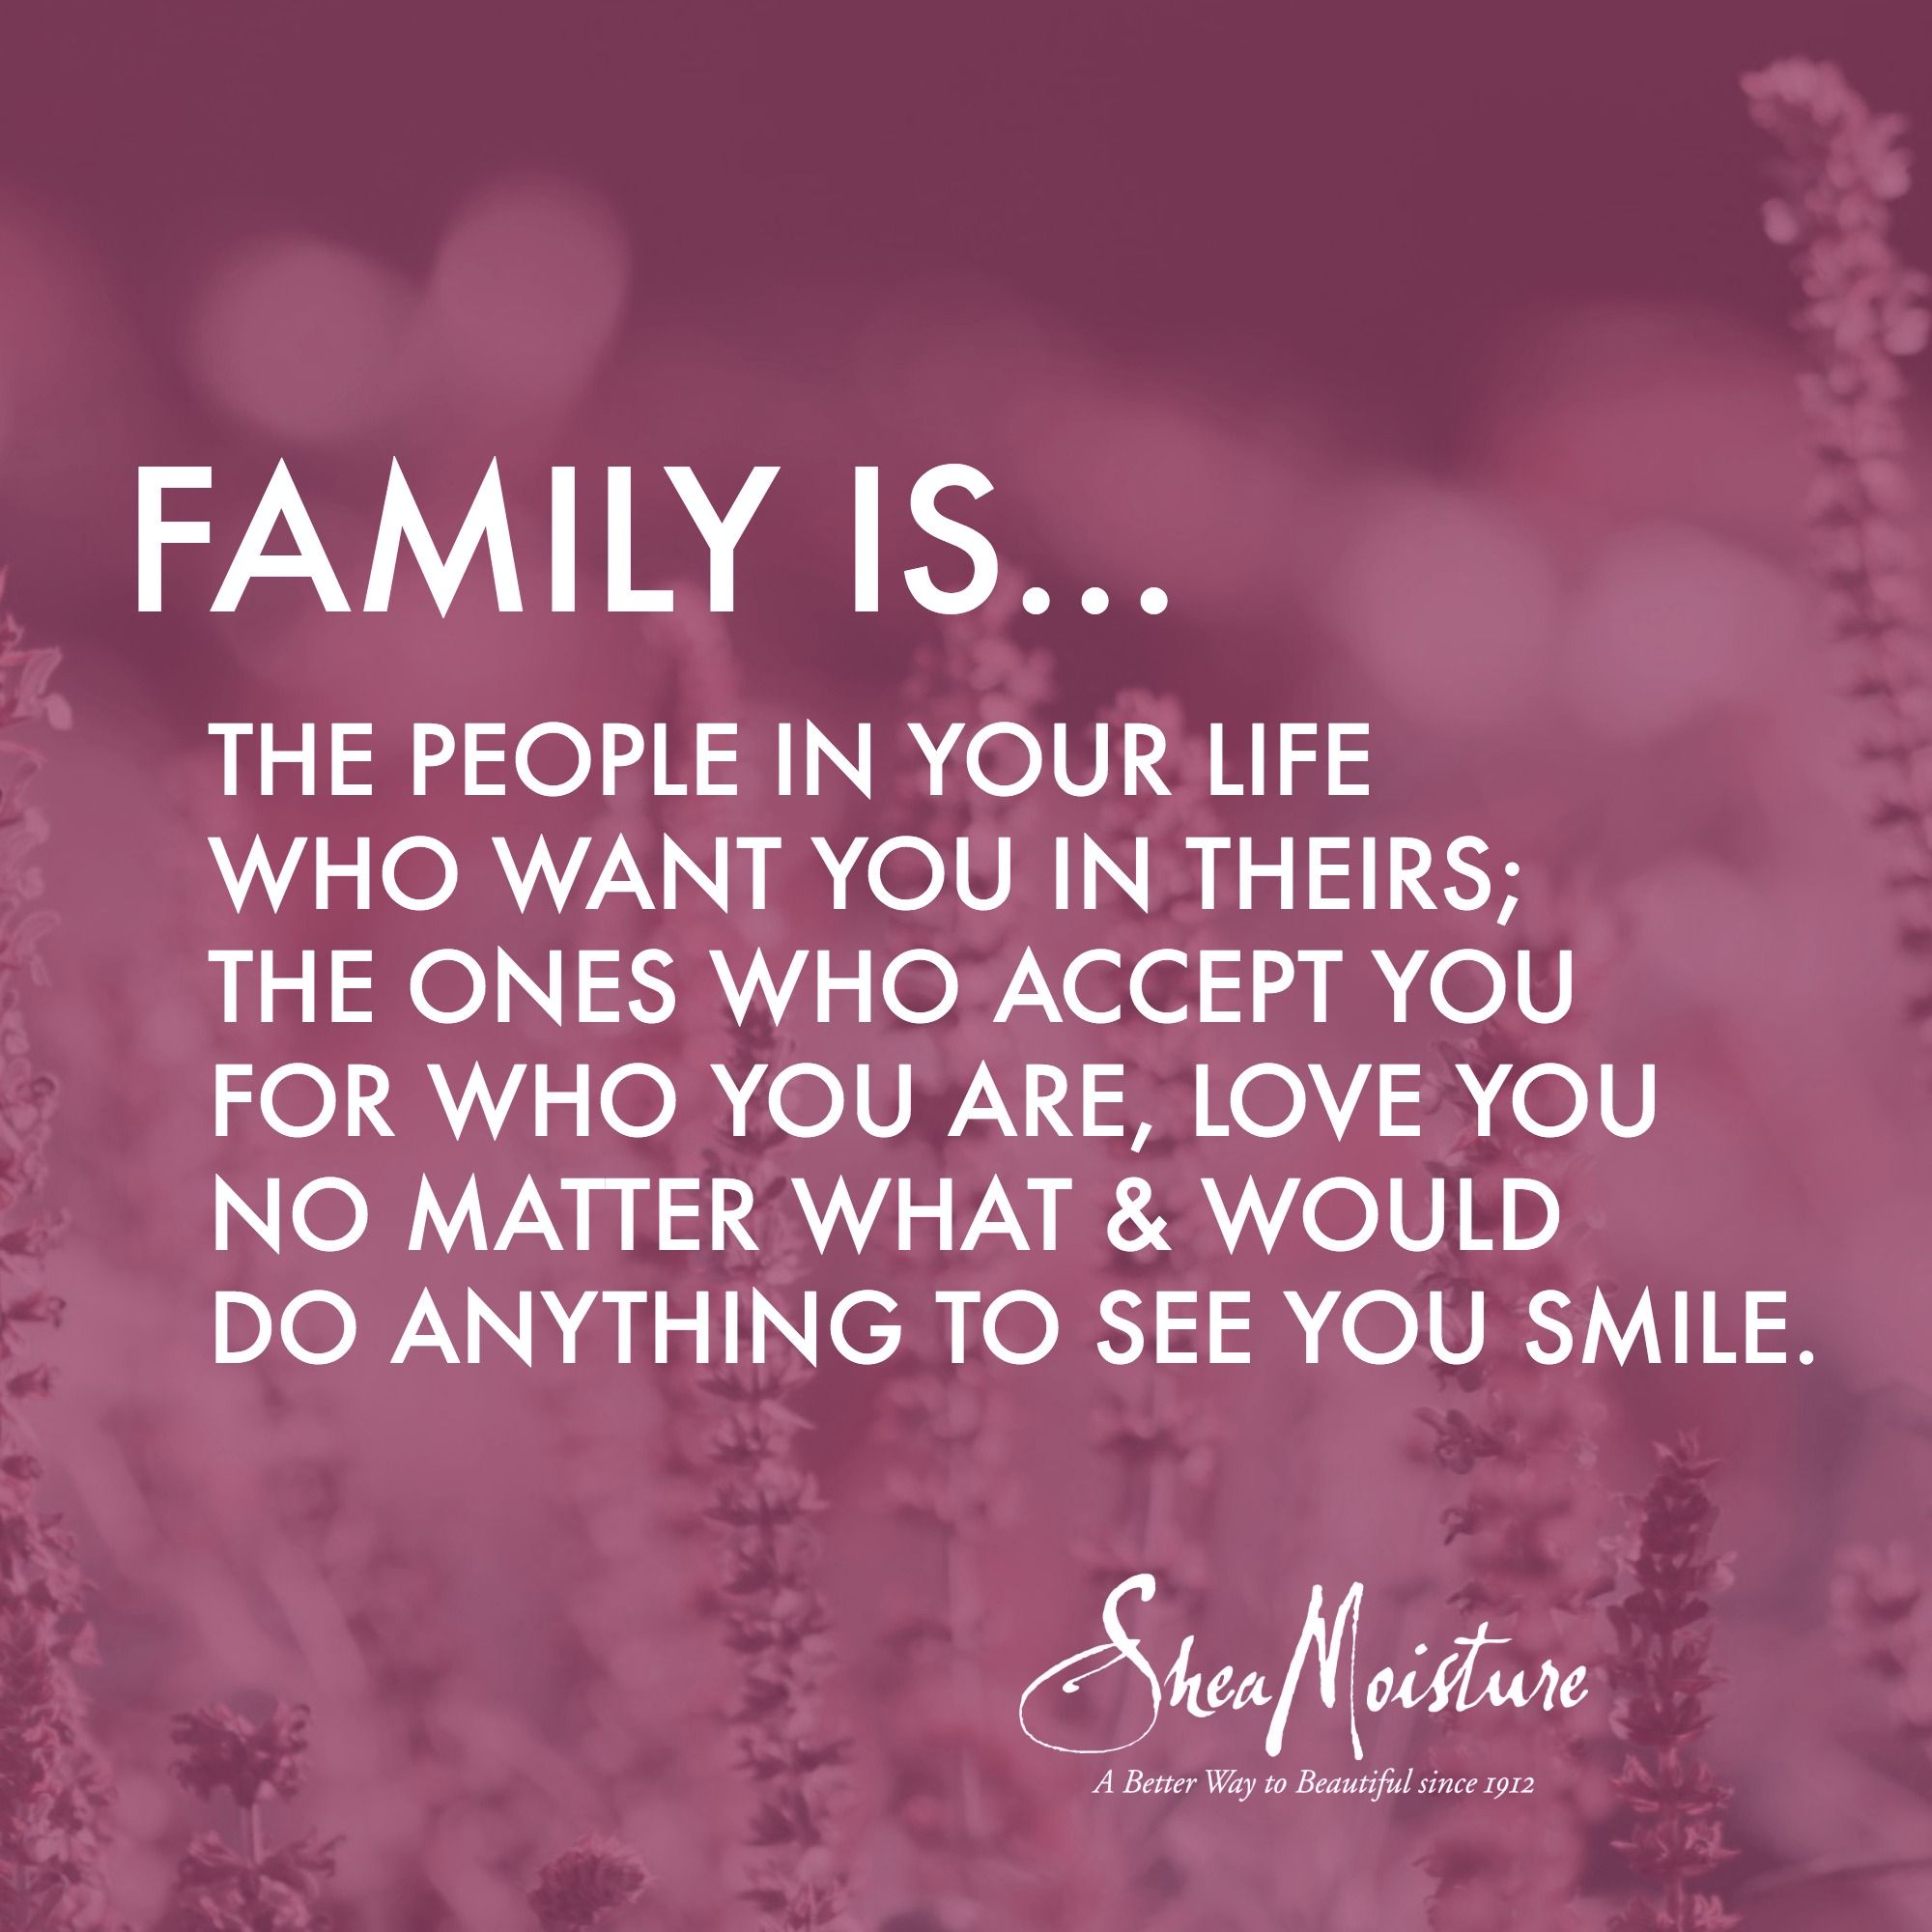 inspiring family and families quotes about understanding the true meaning of family those who love and accept you no matter what